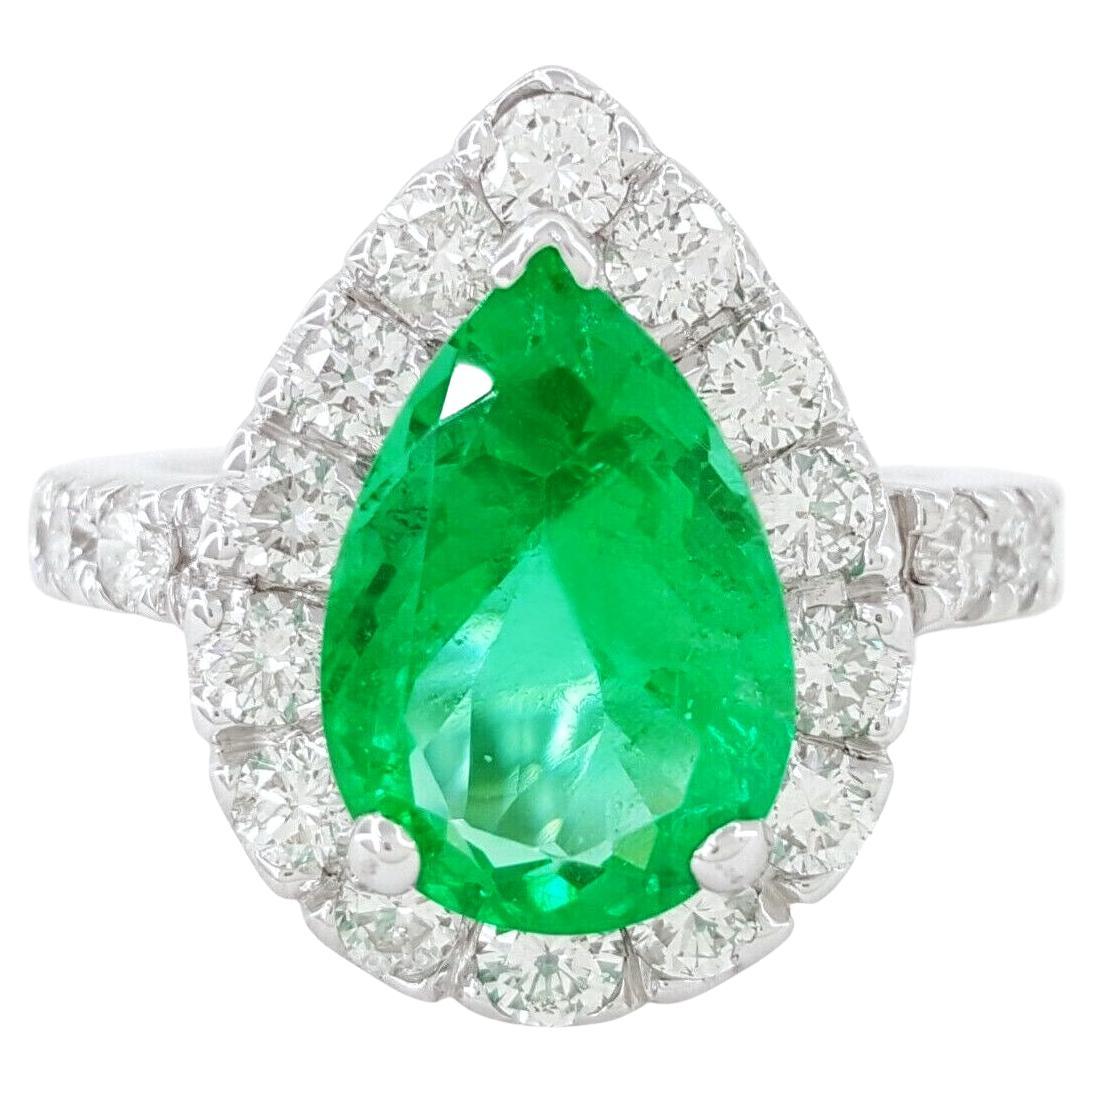 GIA 3.38 Carat No Oil Colombian Emerald Diamond Ring For Sale